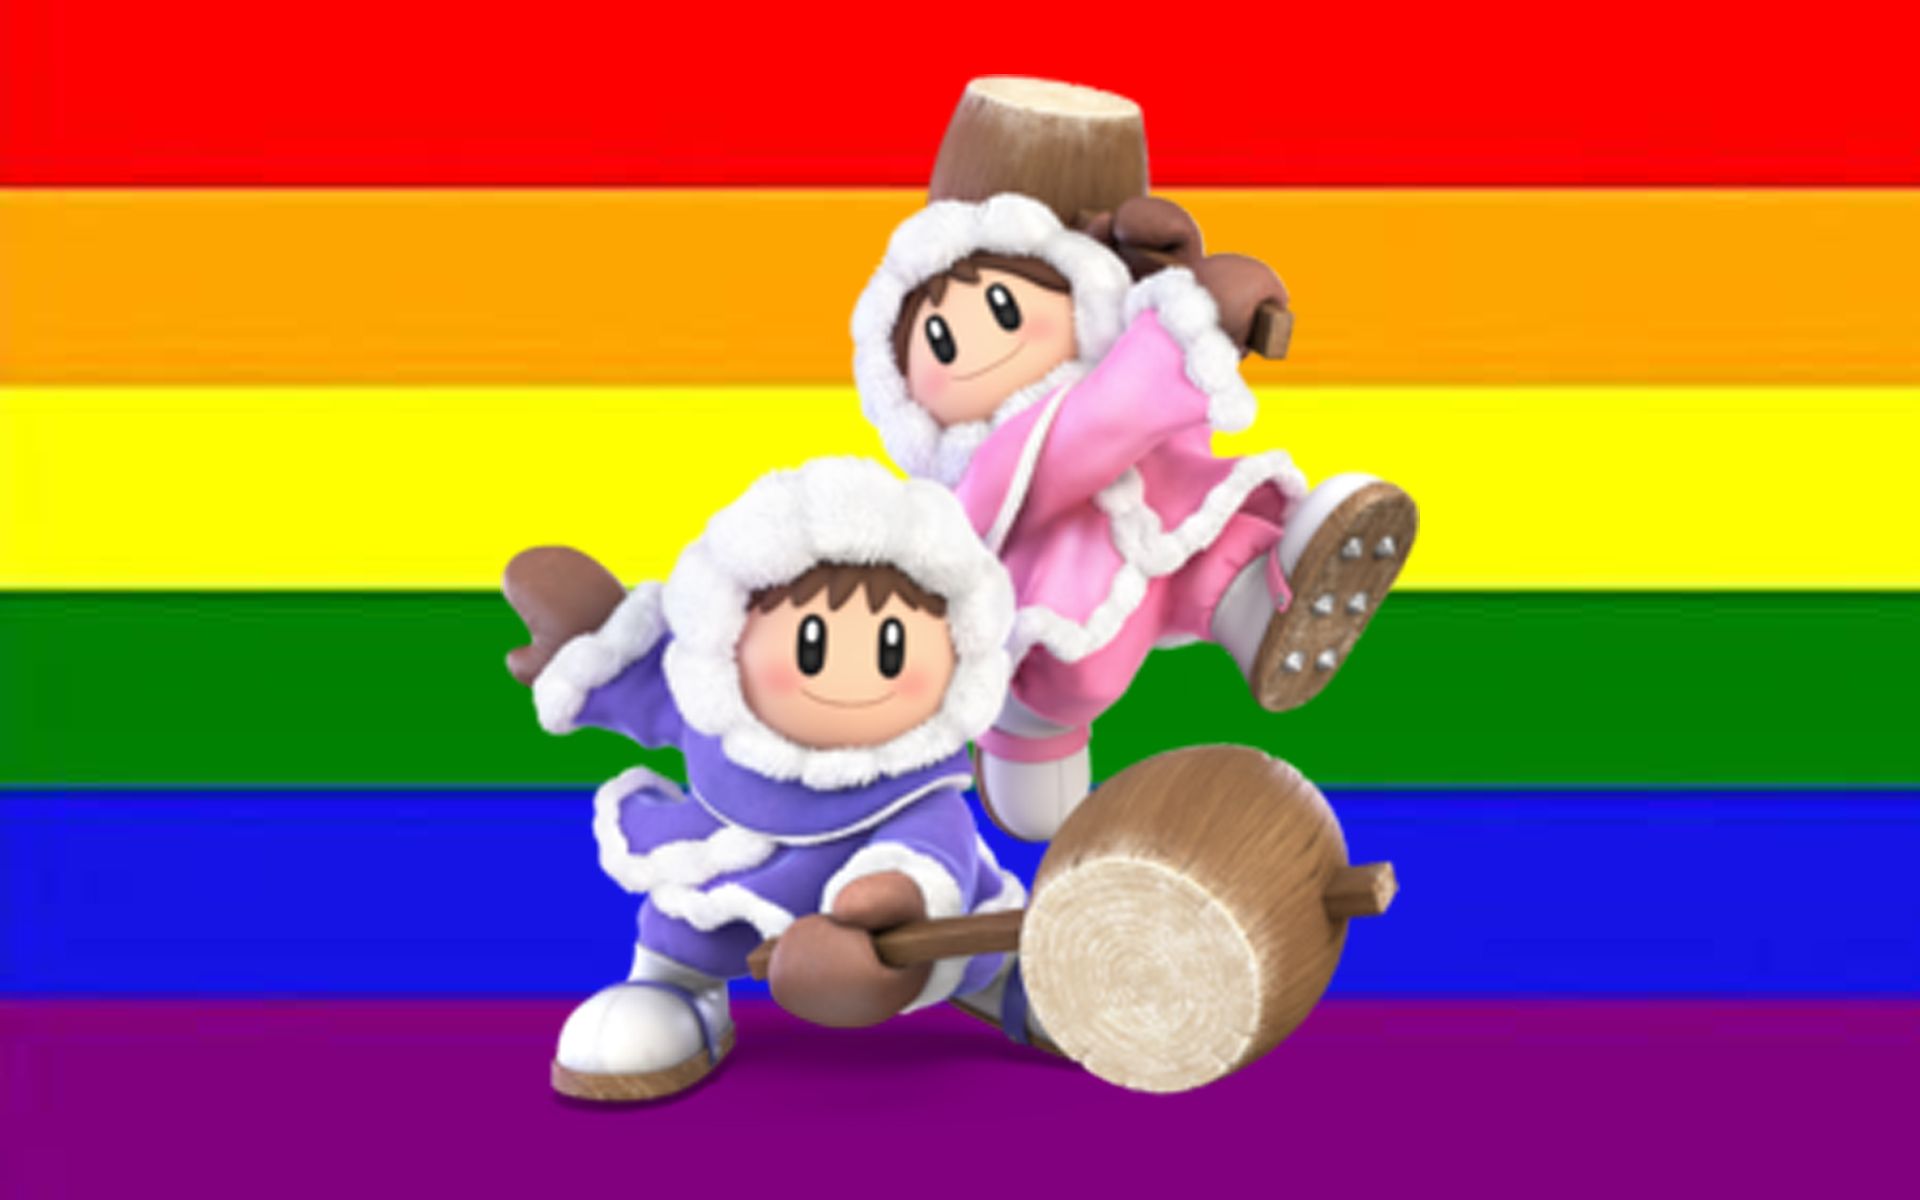 BRAVE: Ice Climbers Are Poly And The Blue One Watches The Pink One Fuck Other Men